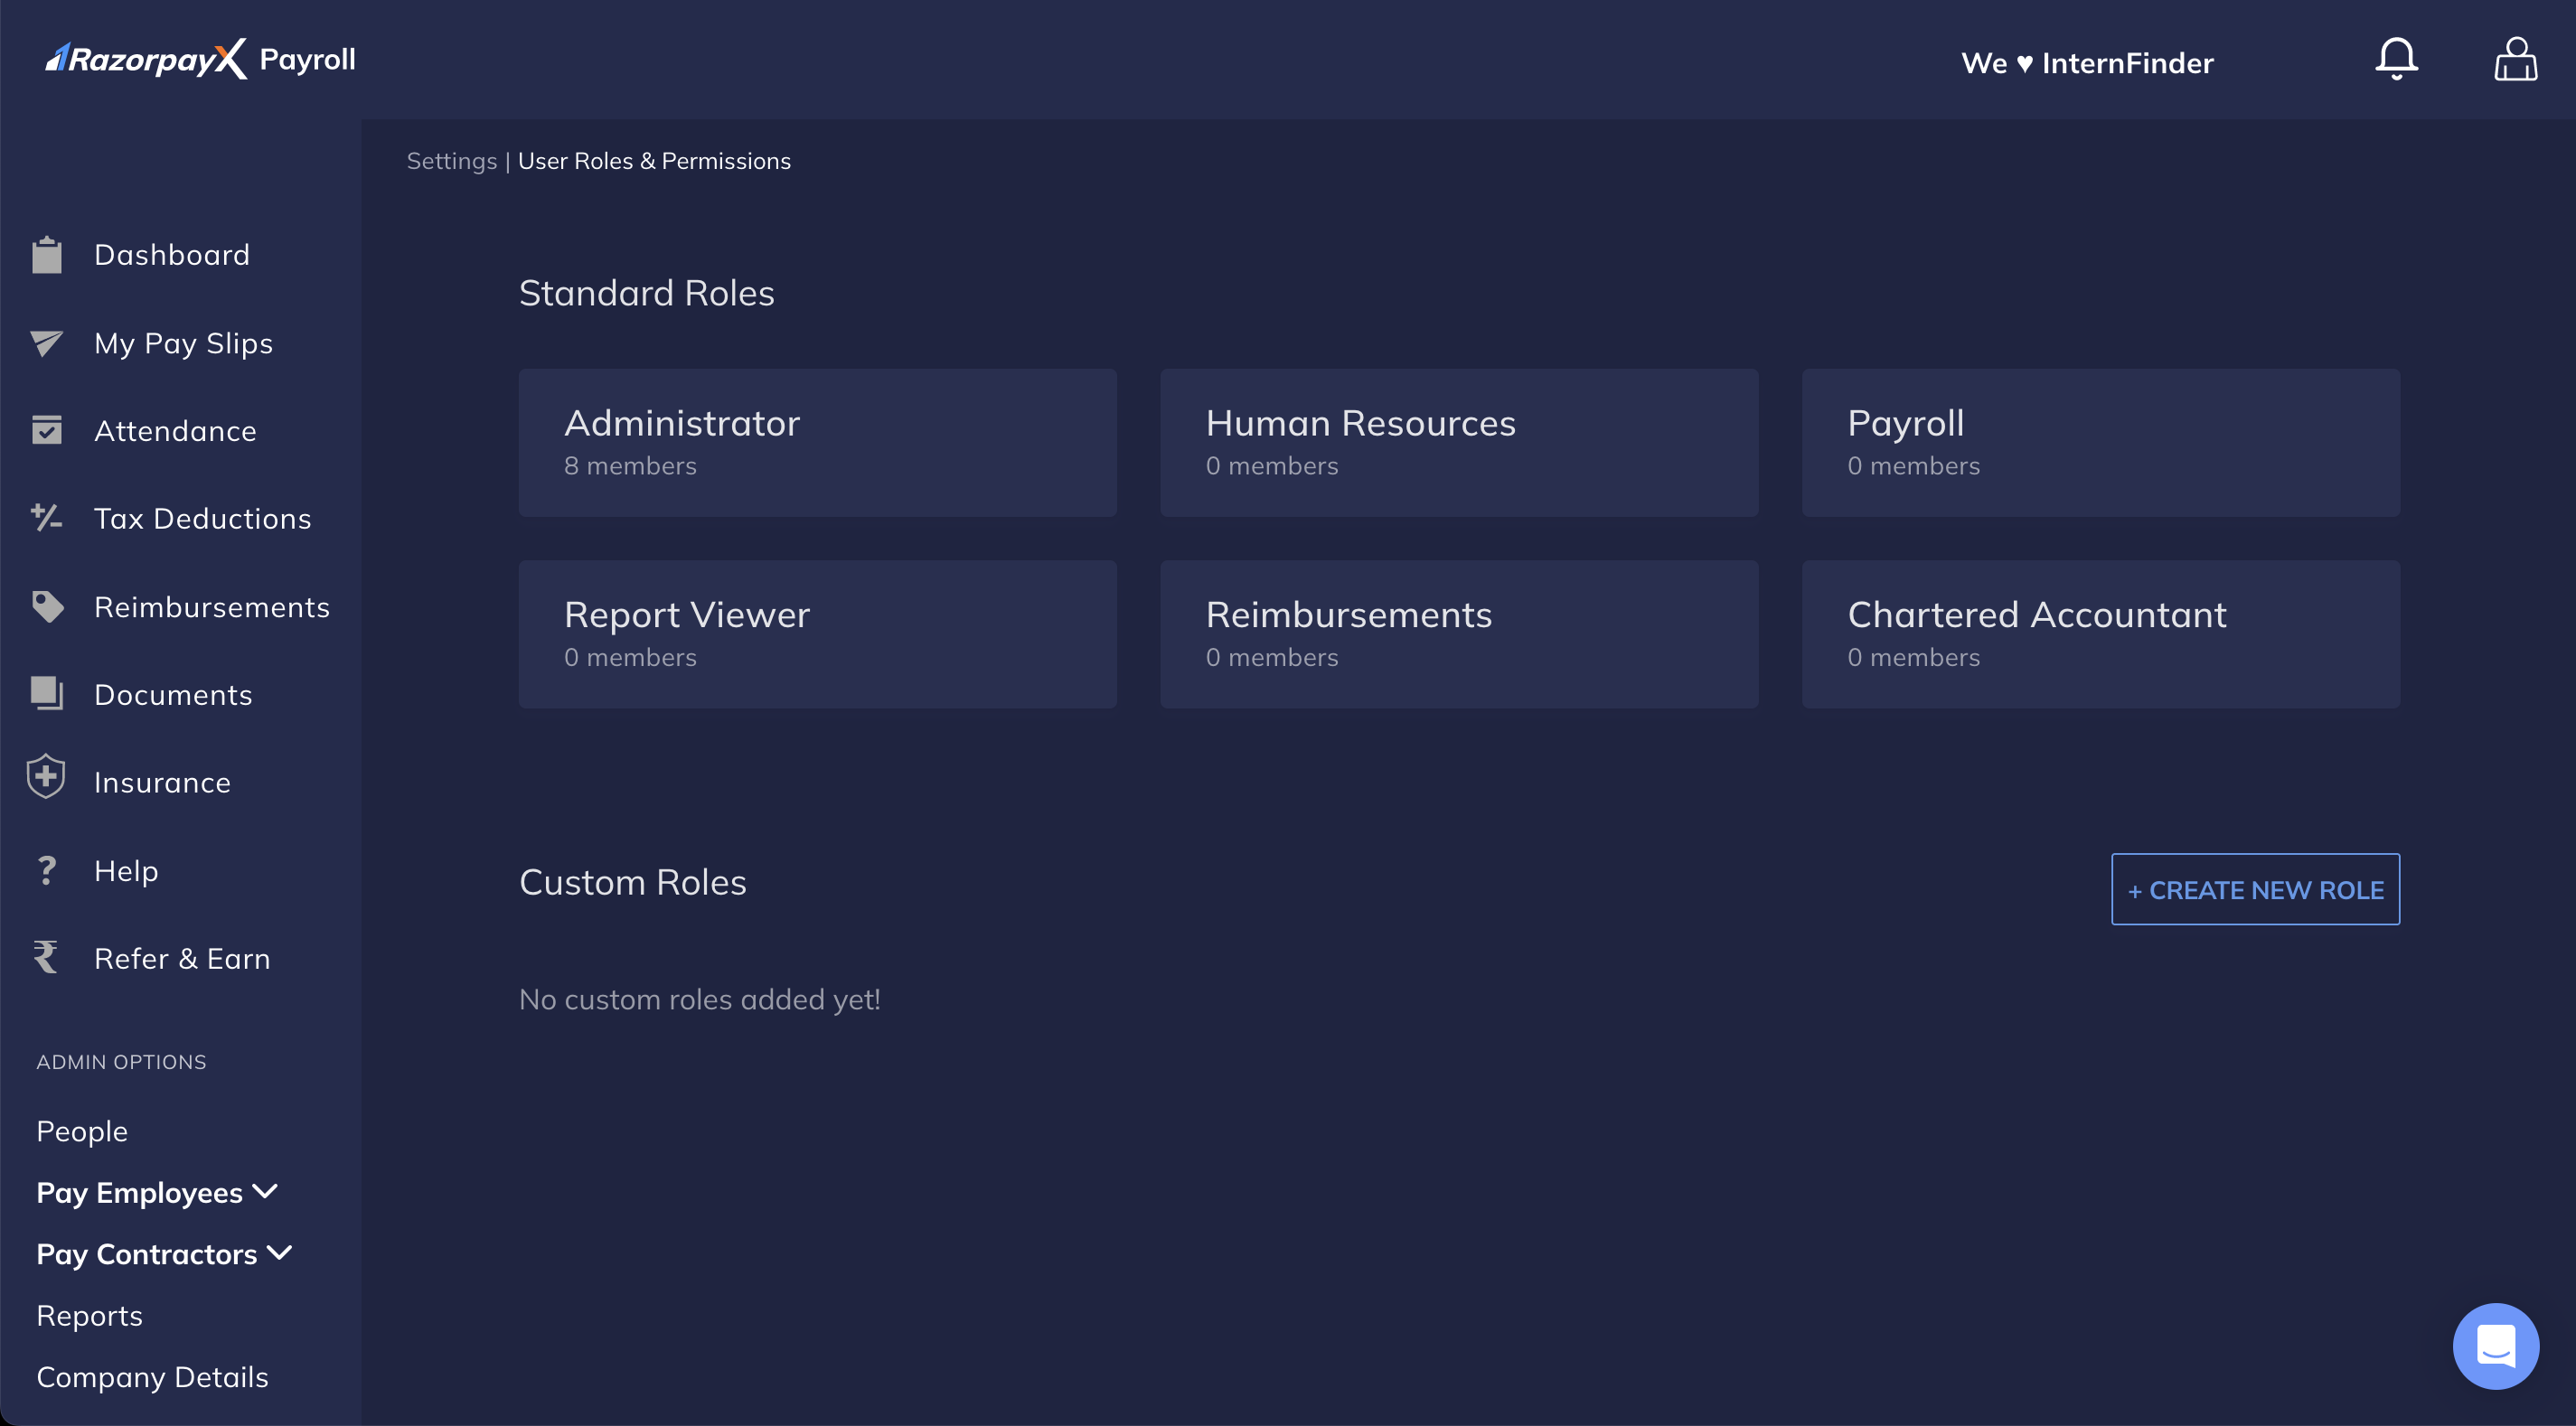 User roles available on the RazorpayX Payroll Dashboard